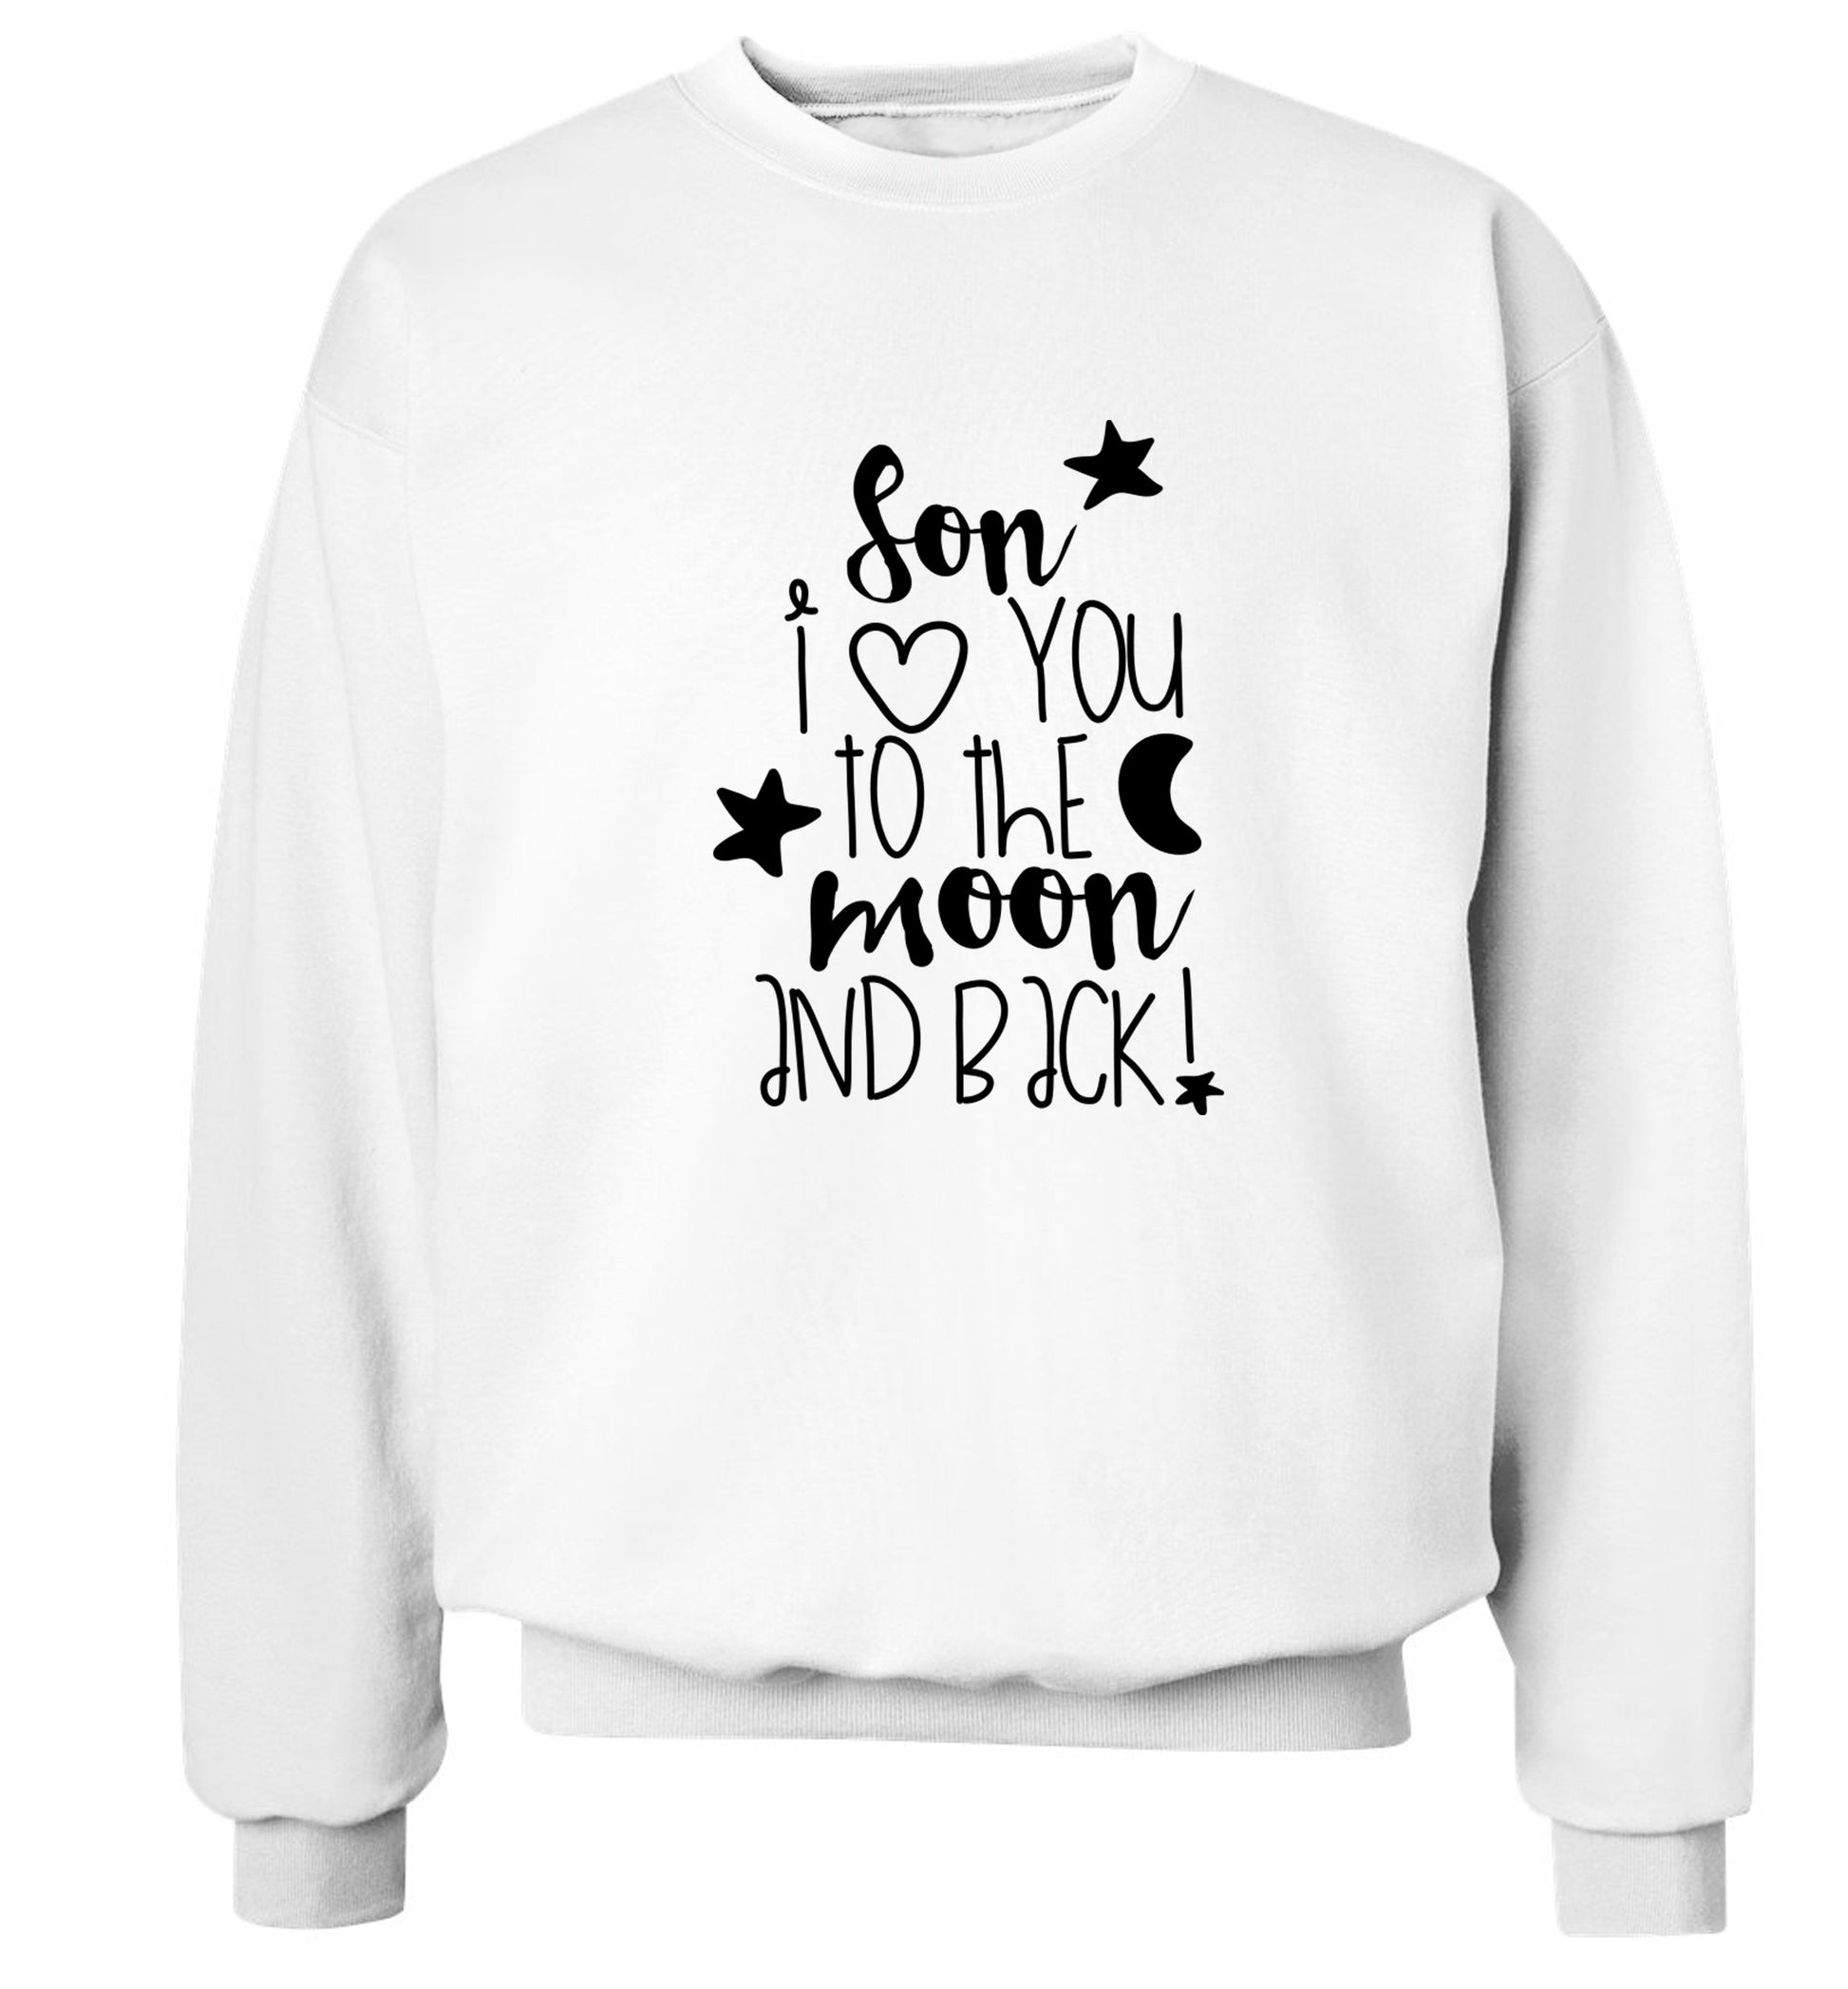 Son I love you to the moon and back Adult's unisex white  sweater 2XL